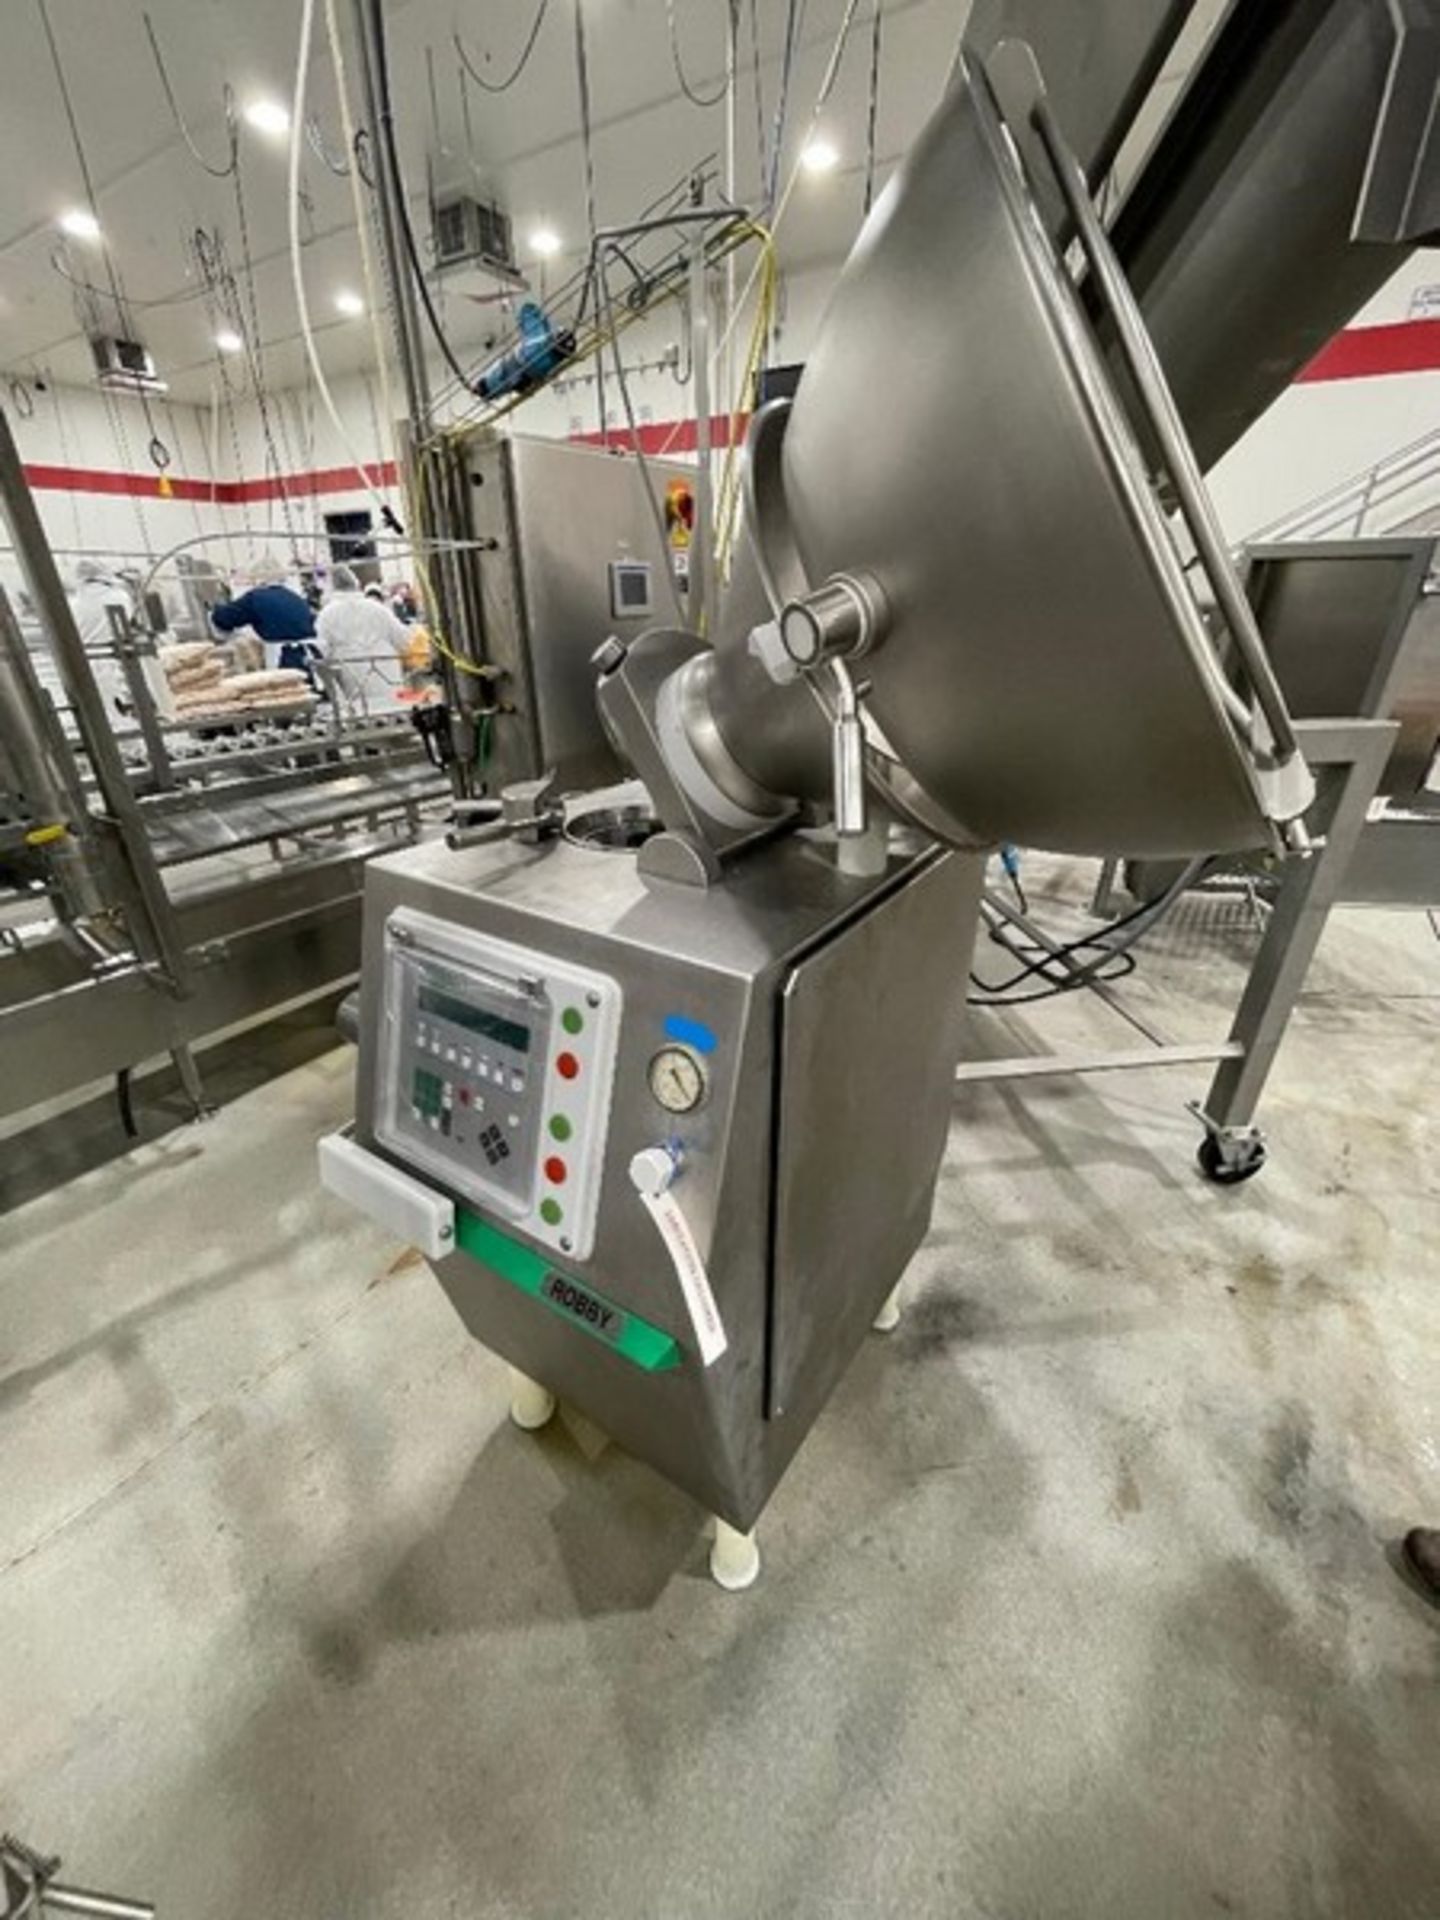 Vemag Robby, Mfg. 2012 - System was Removed from Service Feb. 2024. All S/S Sanitary System with